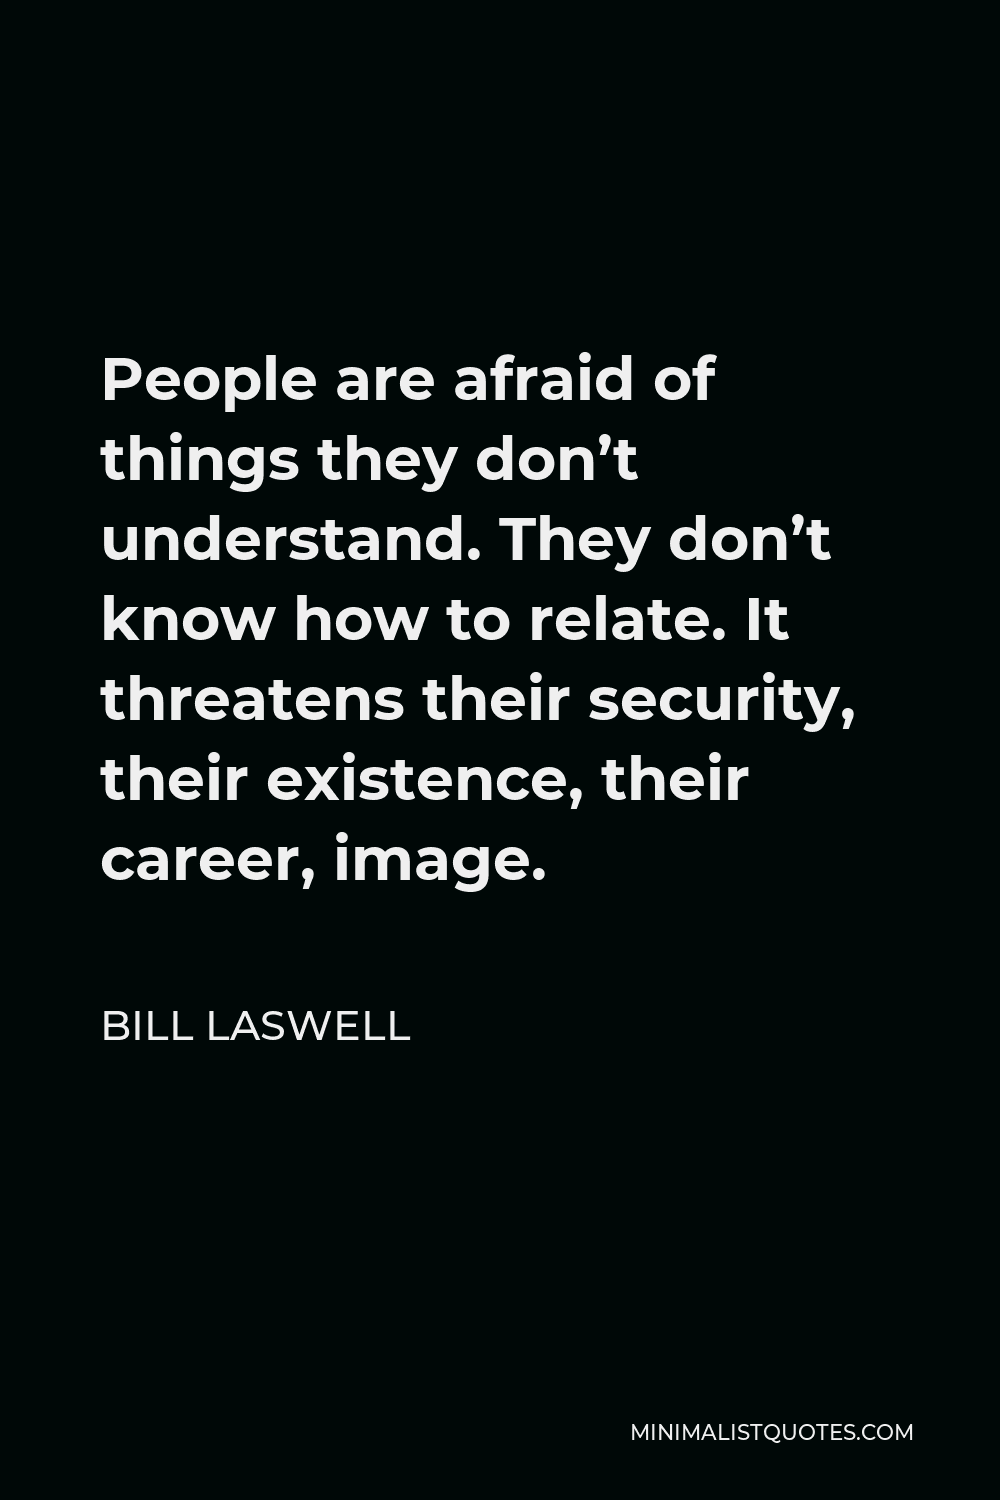 Bill Laswell Quote - People are afraid of things they don’t understand. They don’t know how to relate. It threatens their security, their existence, their career, image.